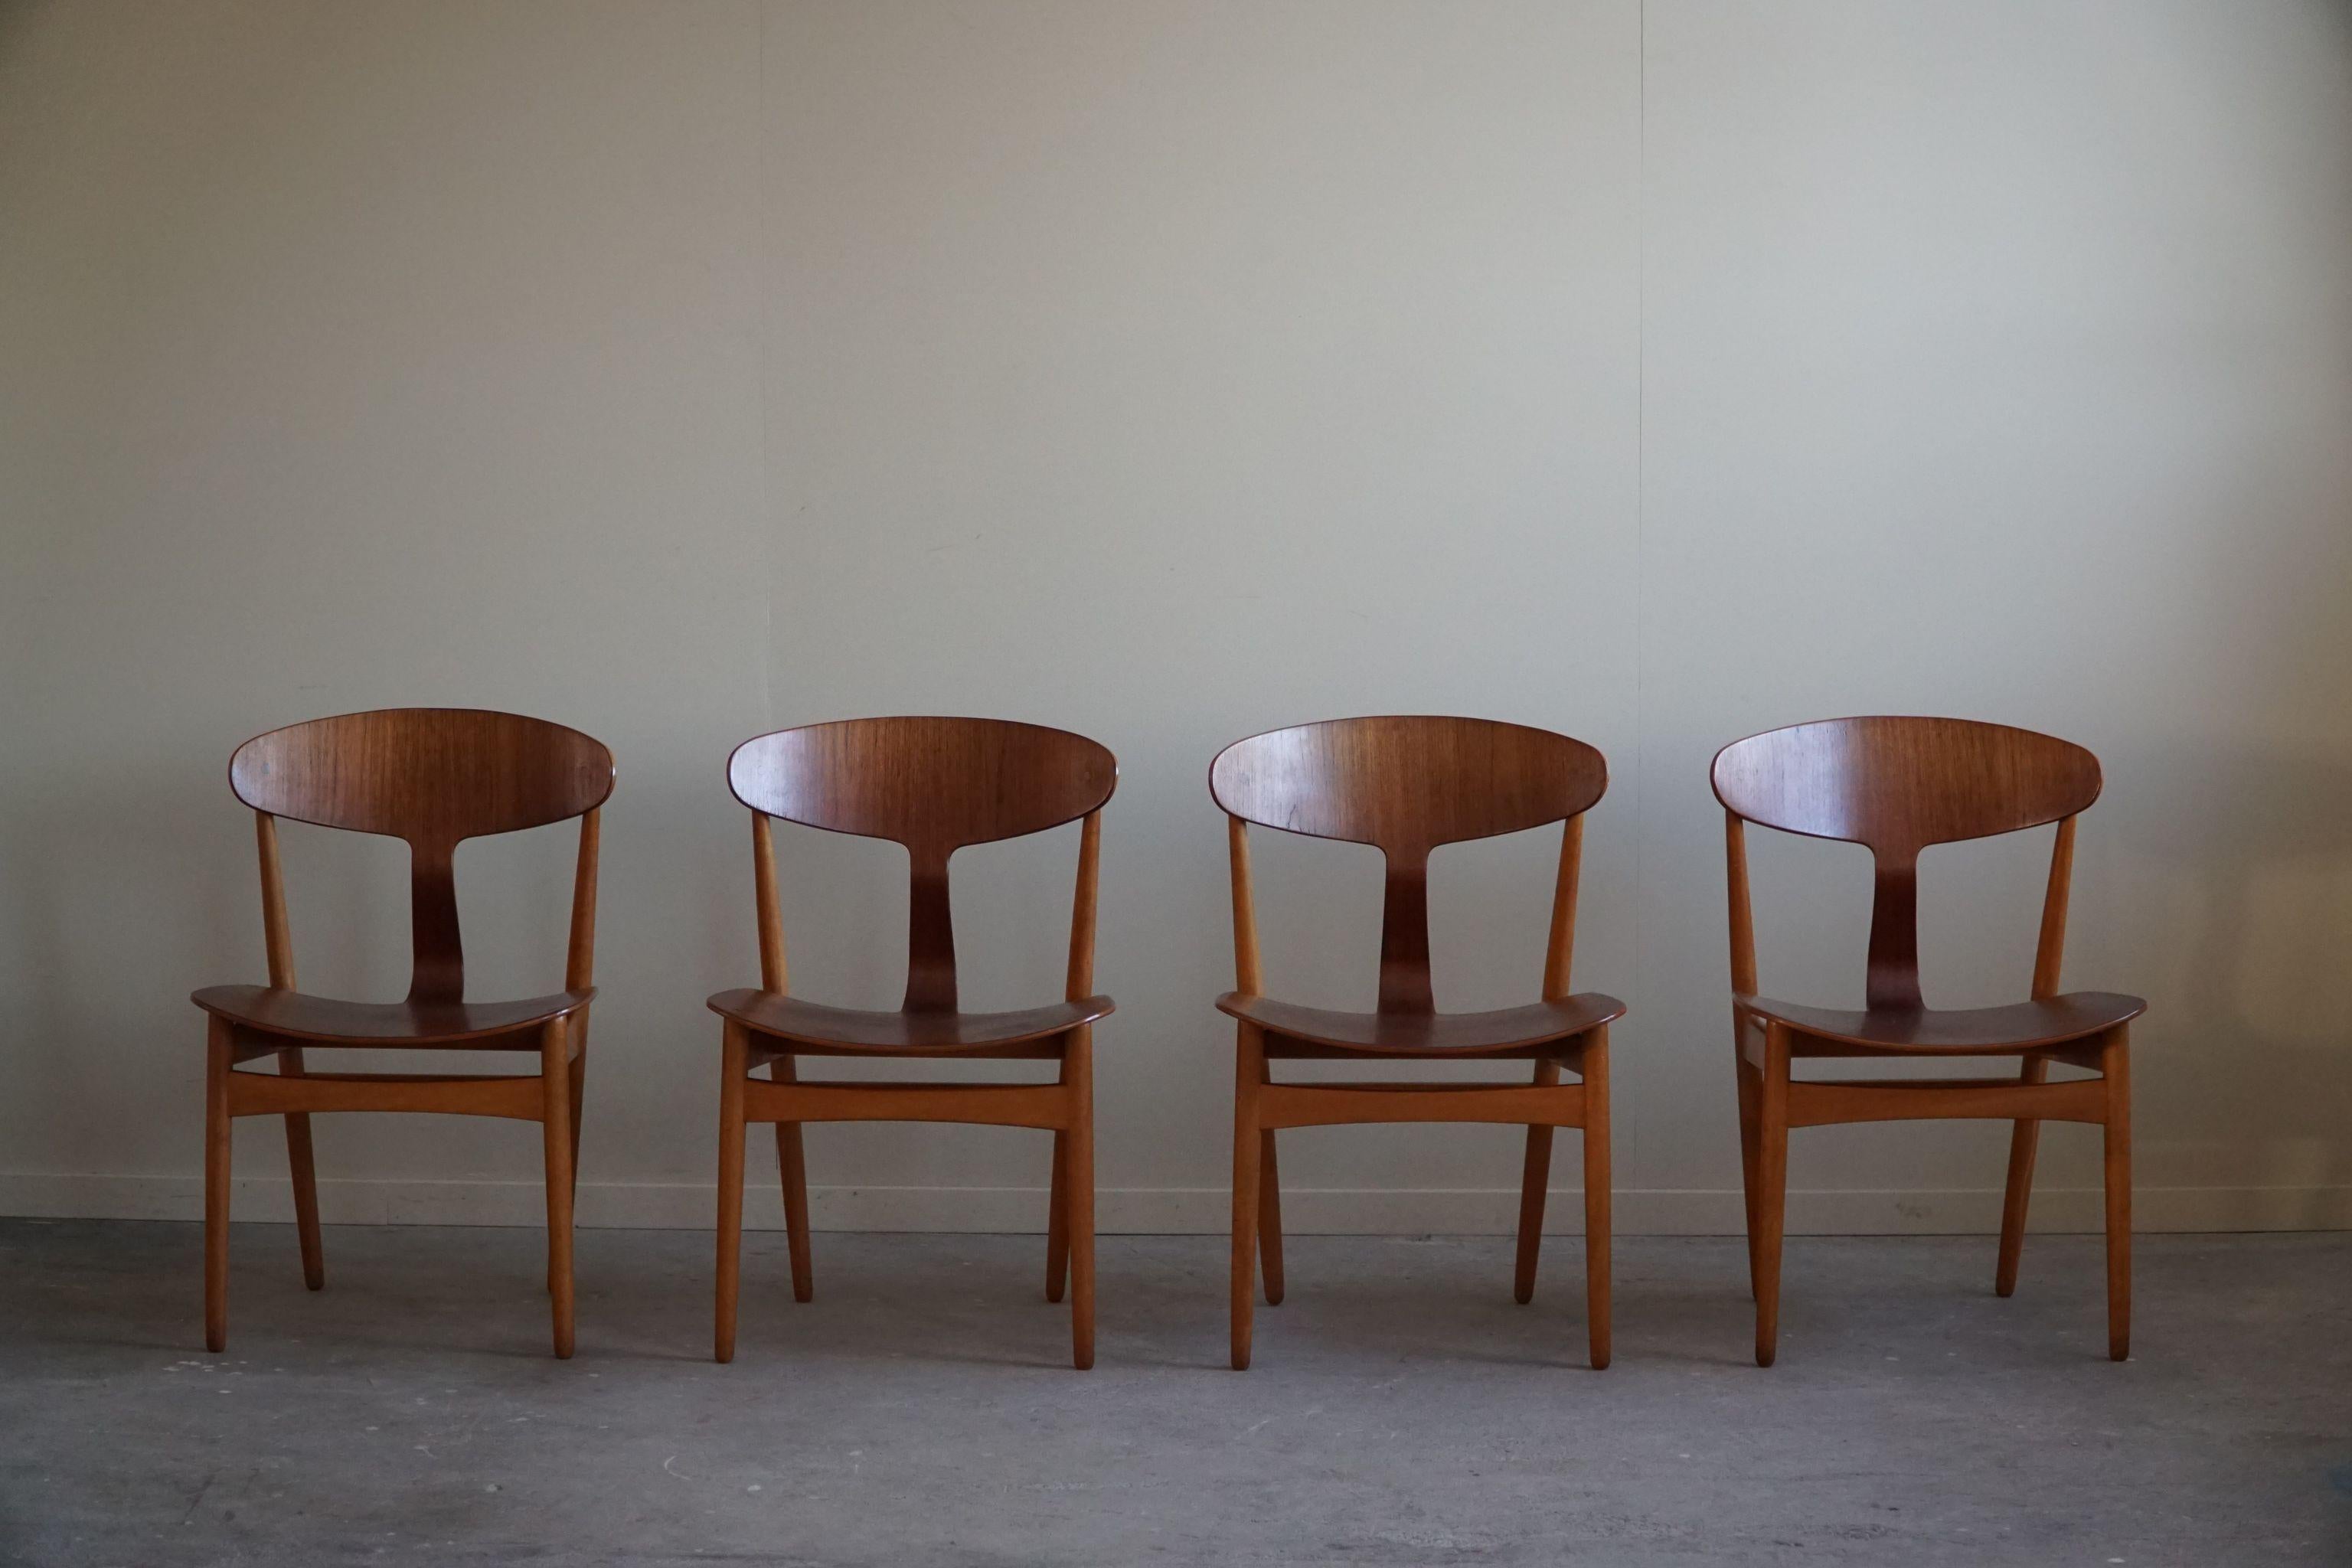 Ejner Larsen & Aksel Bender Madsen, Set of 4 Chairs, Danish Mid Century, 1954 In Good Condition For Sale In Odense, DK